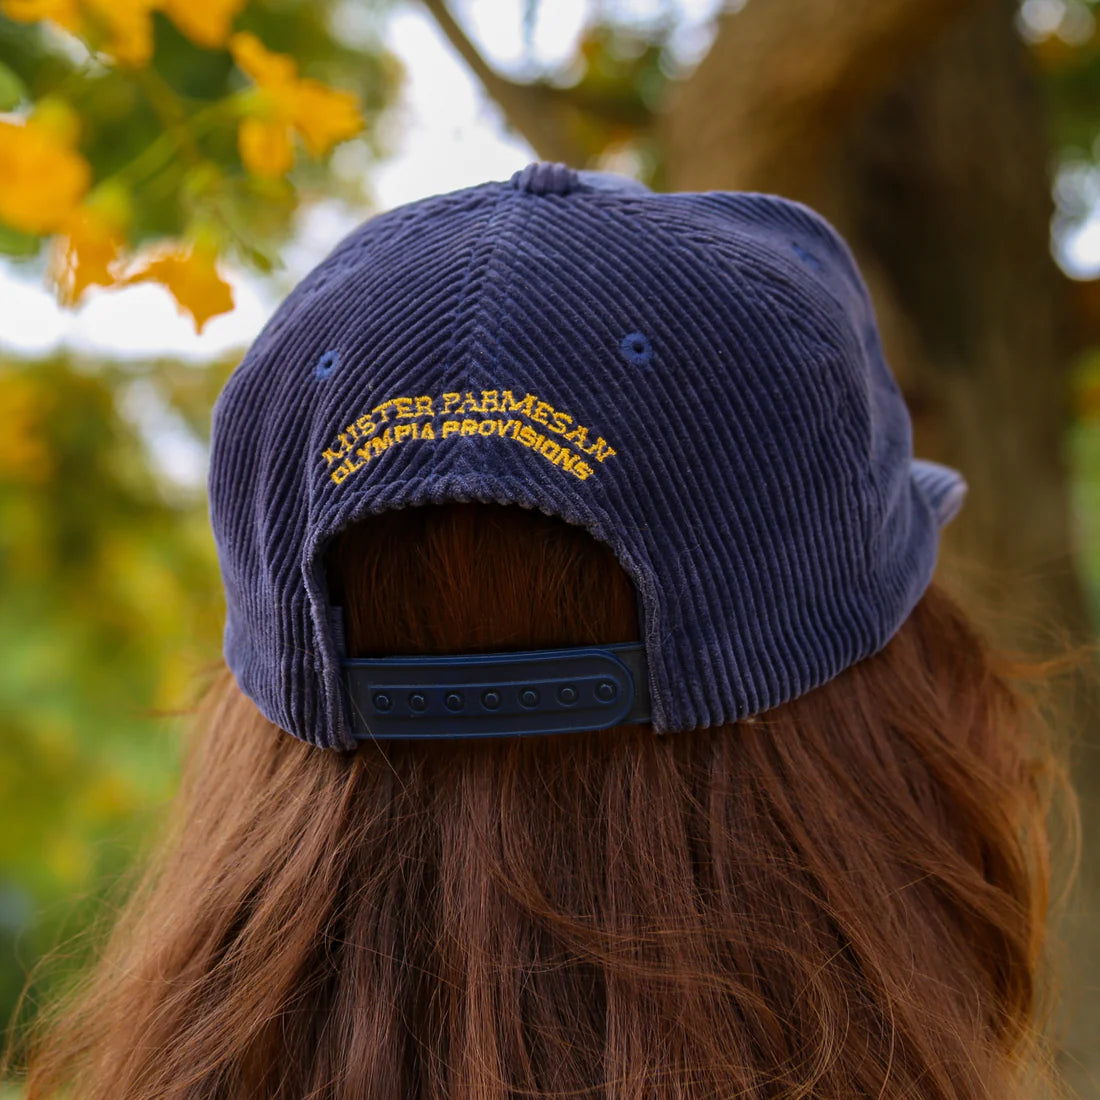 Back view - Salami hat with "Mister Parmesan x Olympia Provisions" embroidered in gold.